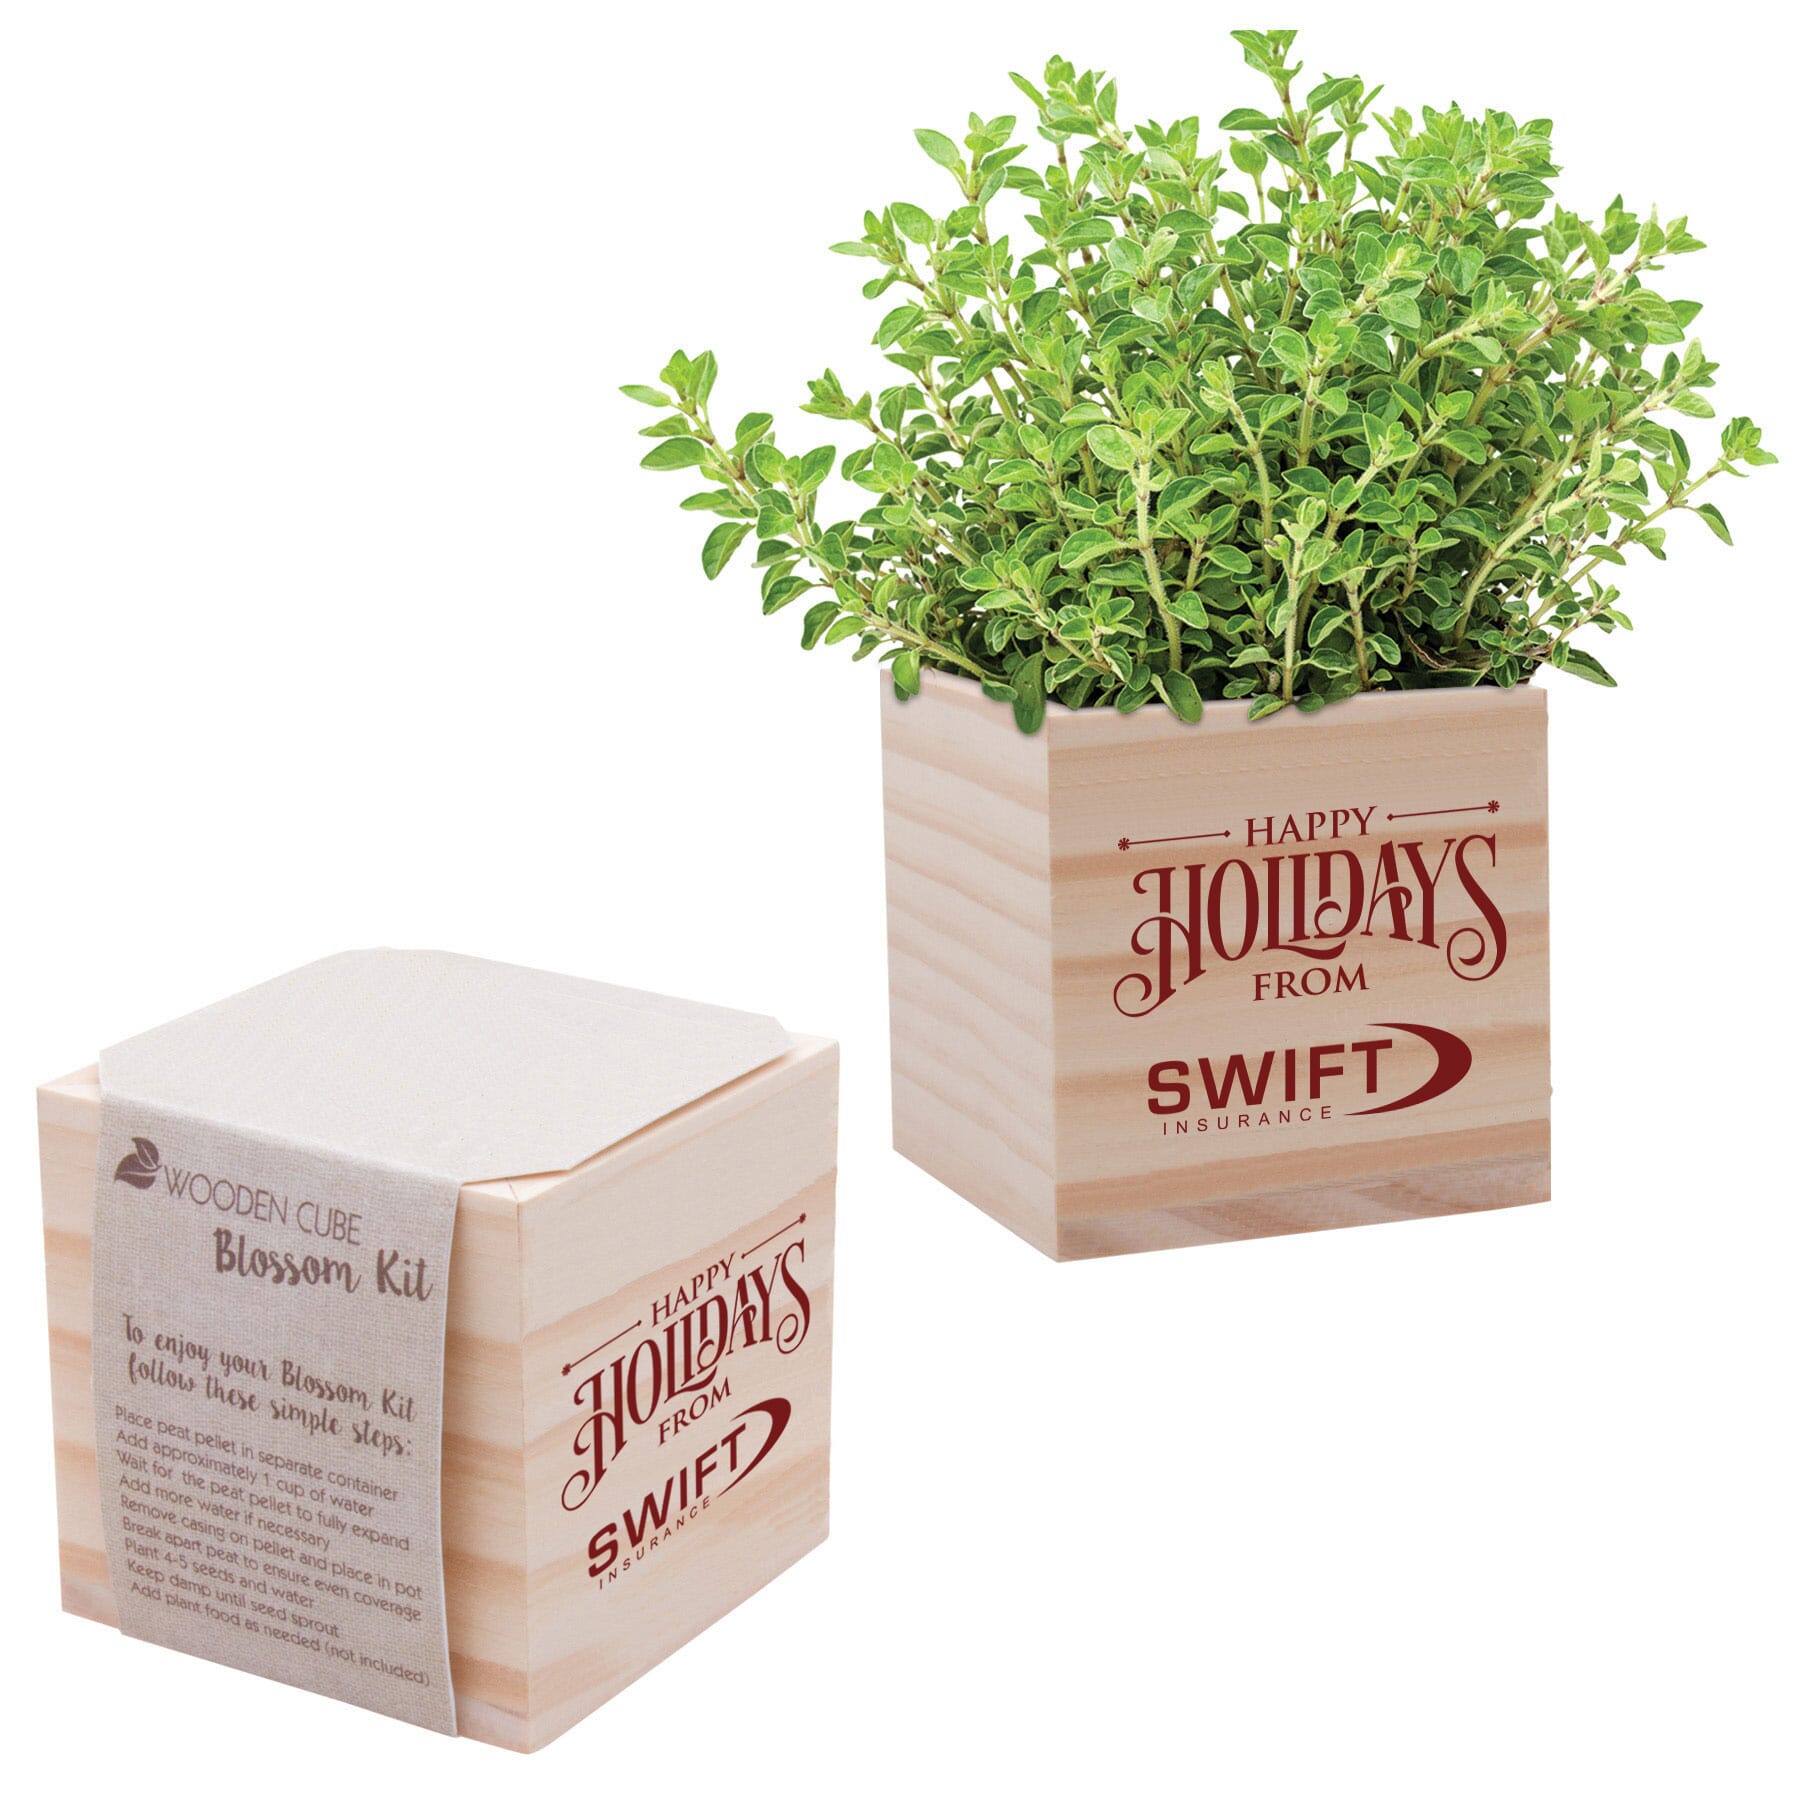 Personalized Wooden Planter Box